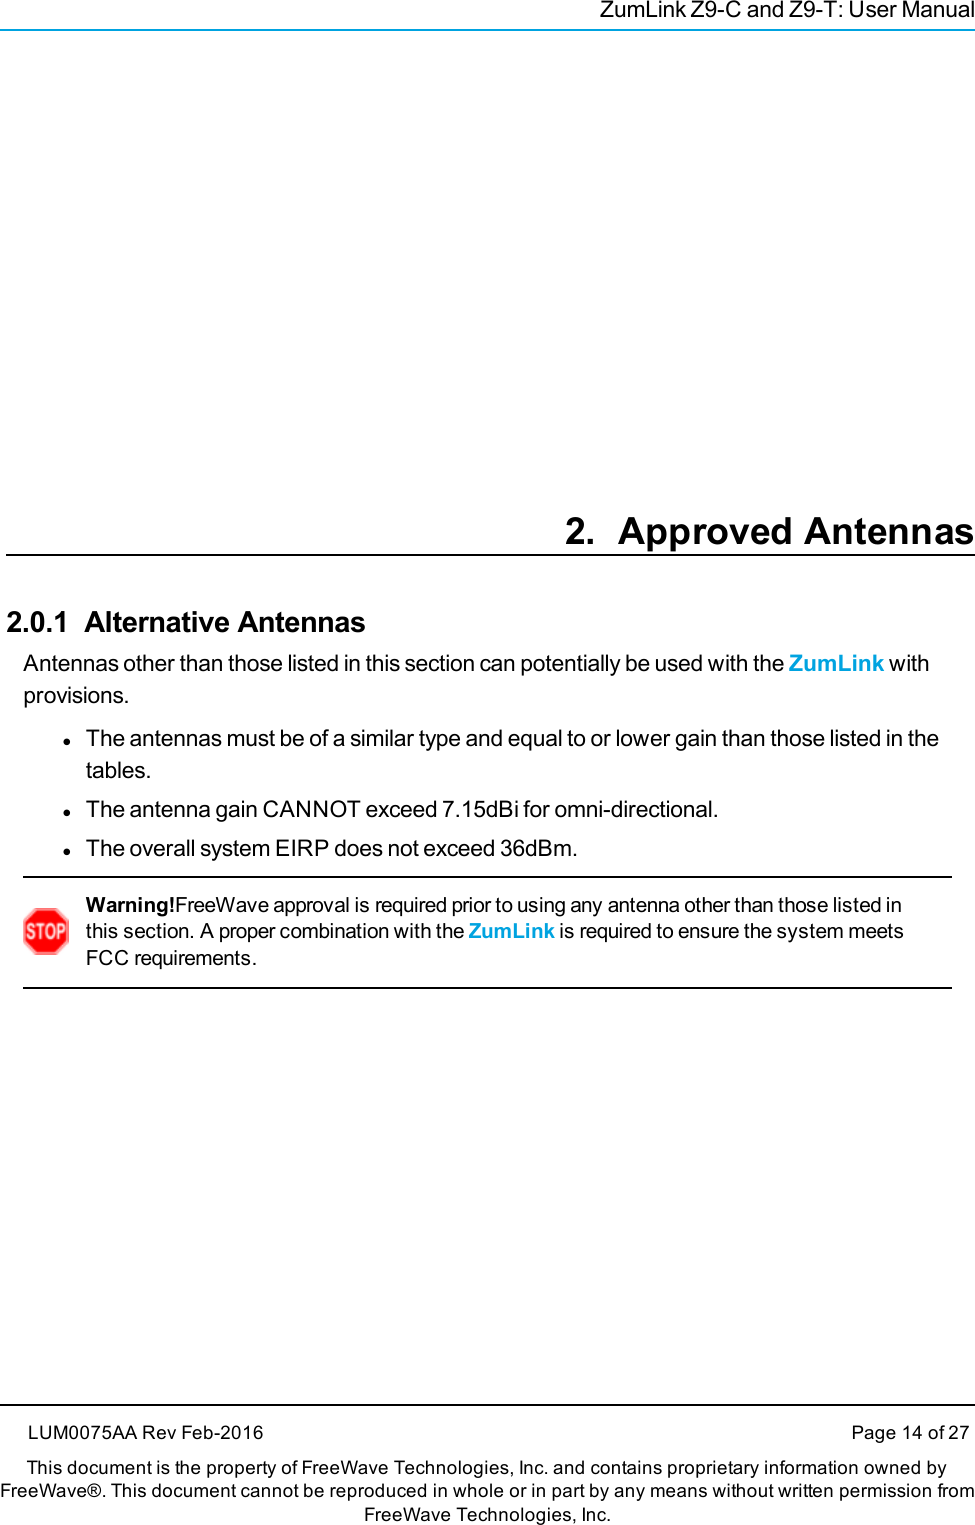 ZumLink Z9-C and Z9-T: User Manual2. Approved Antennas2.0.1 Alternative AntennasAntennas other than those listed in this section can potentially be used with the ZumLink withprovisions.lThe antennas must be of a similar type and equal to or lower gain than those listed in thetables.lThe antenna gain CANNOT exceed 7.15dBi for omni-directional.lThe overall system EIRP does not exceed 36dBm.Warning!FreeWave approval is required prior to using any antenna other than those listed inthis section. A proper combination with the ZumLink is required to ensure the system meetsFCC requirements.LUM0075AA Rev Feb-2016 Page 14 of 27This document is the property of FreeWave Technologies, Inc. and contains proprietary information owned byFreeWave®. This document cannot be reproduced in whole or in part by any means without written permission fromFreeWave Technologies, Inc.